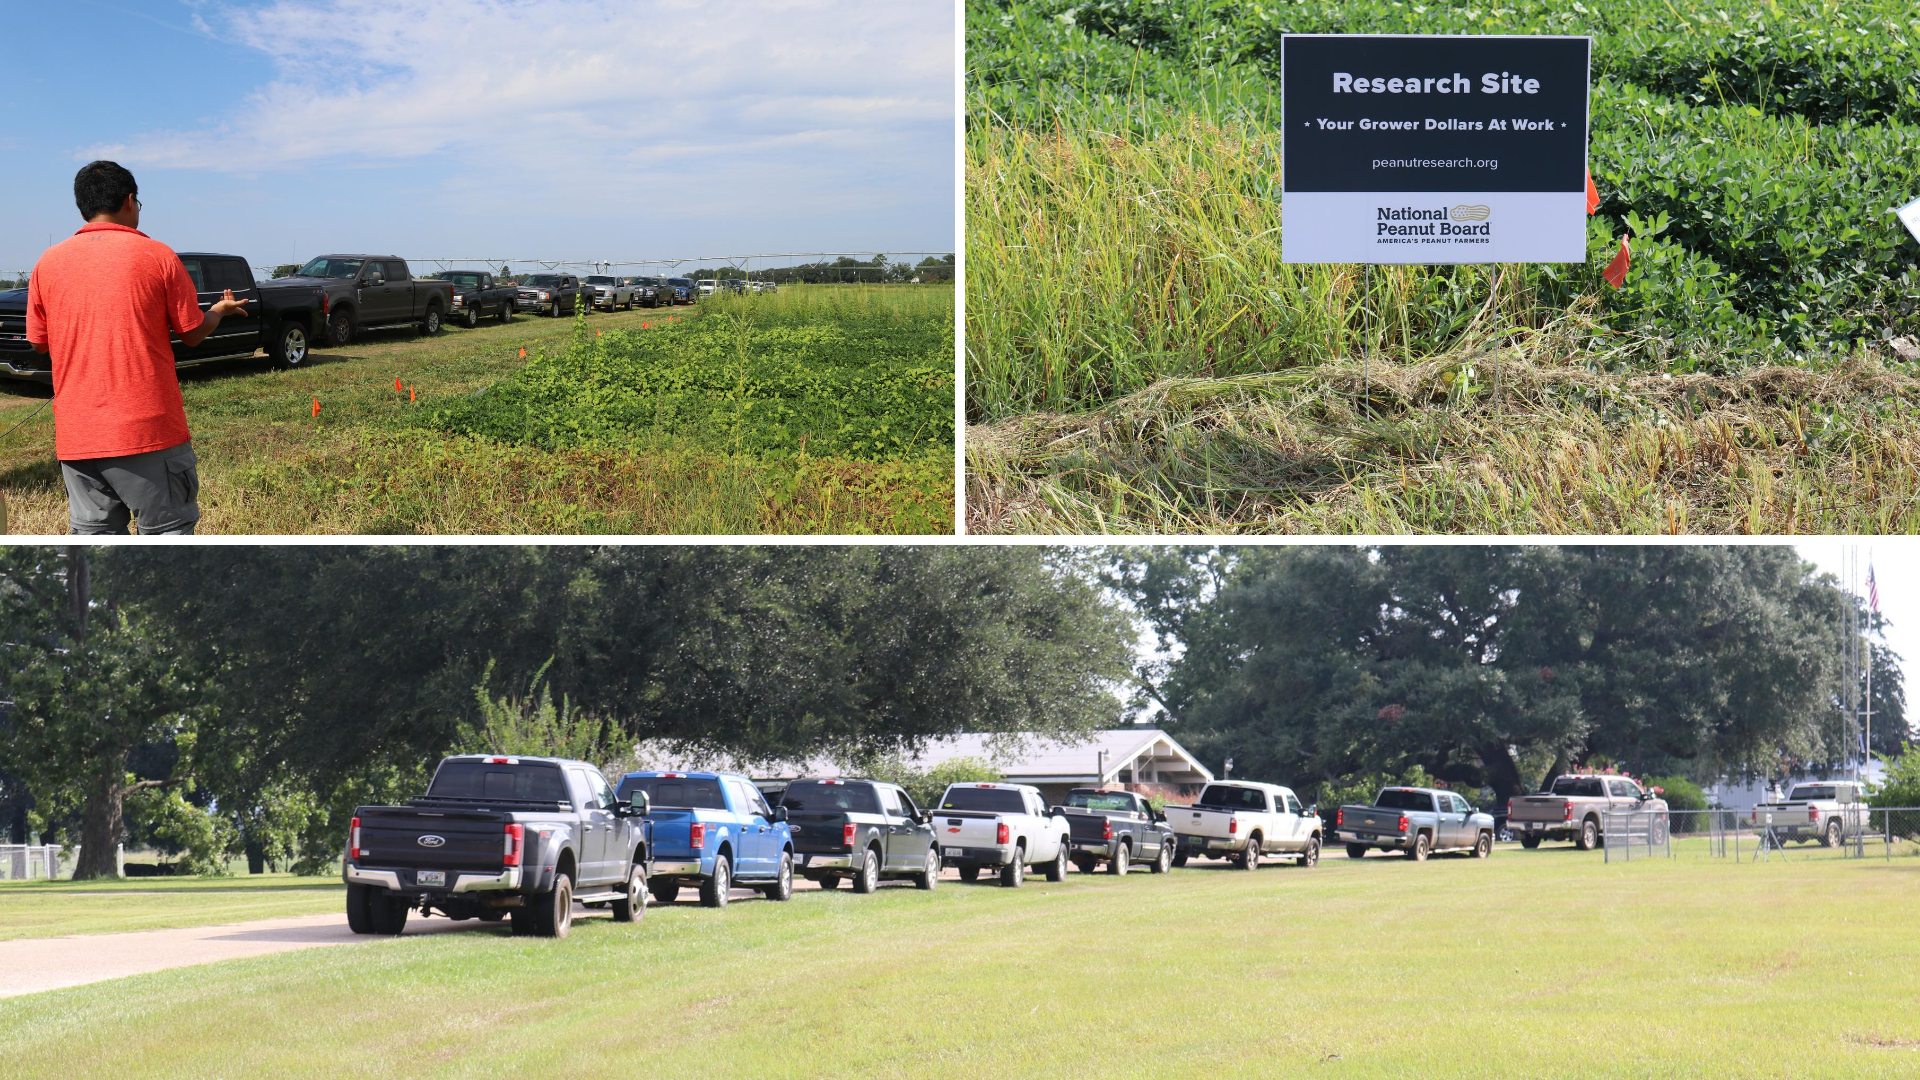 Social Distancing Wiregrass Weed Tour Showcases Continuing Research